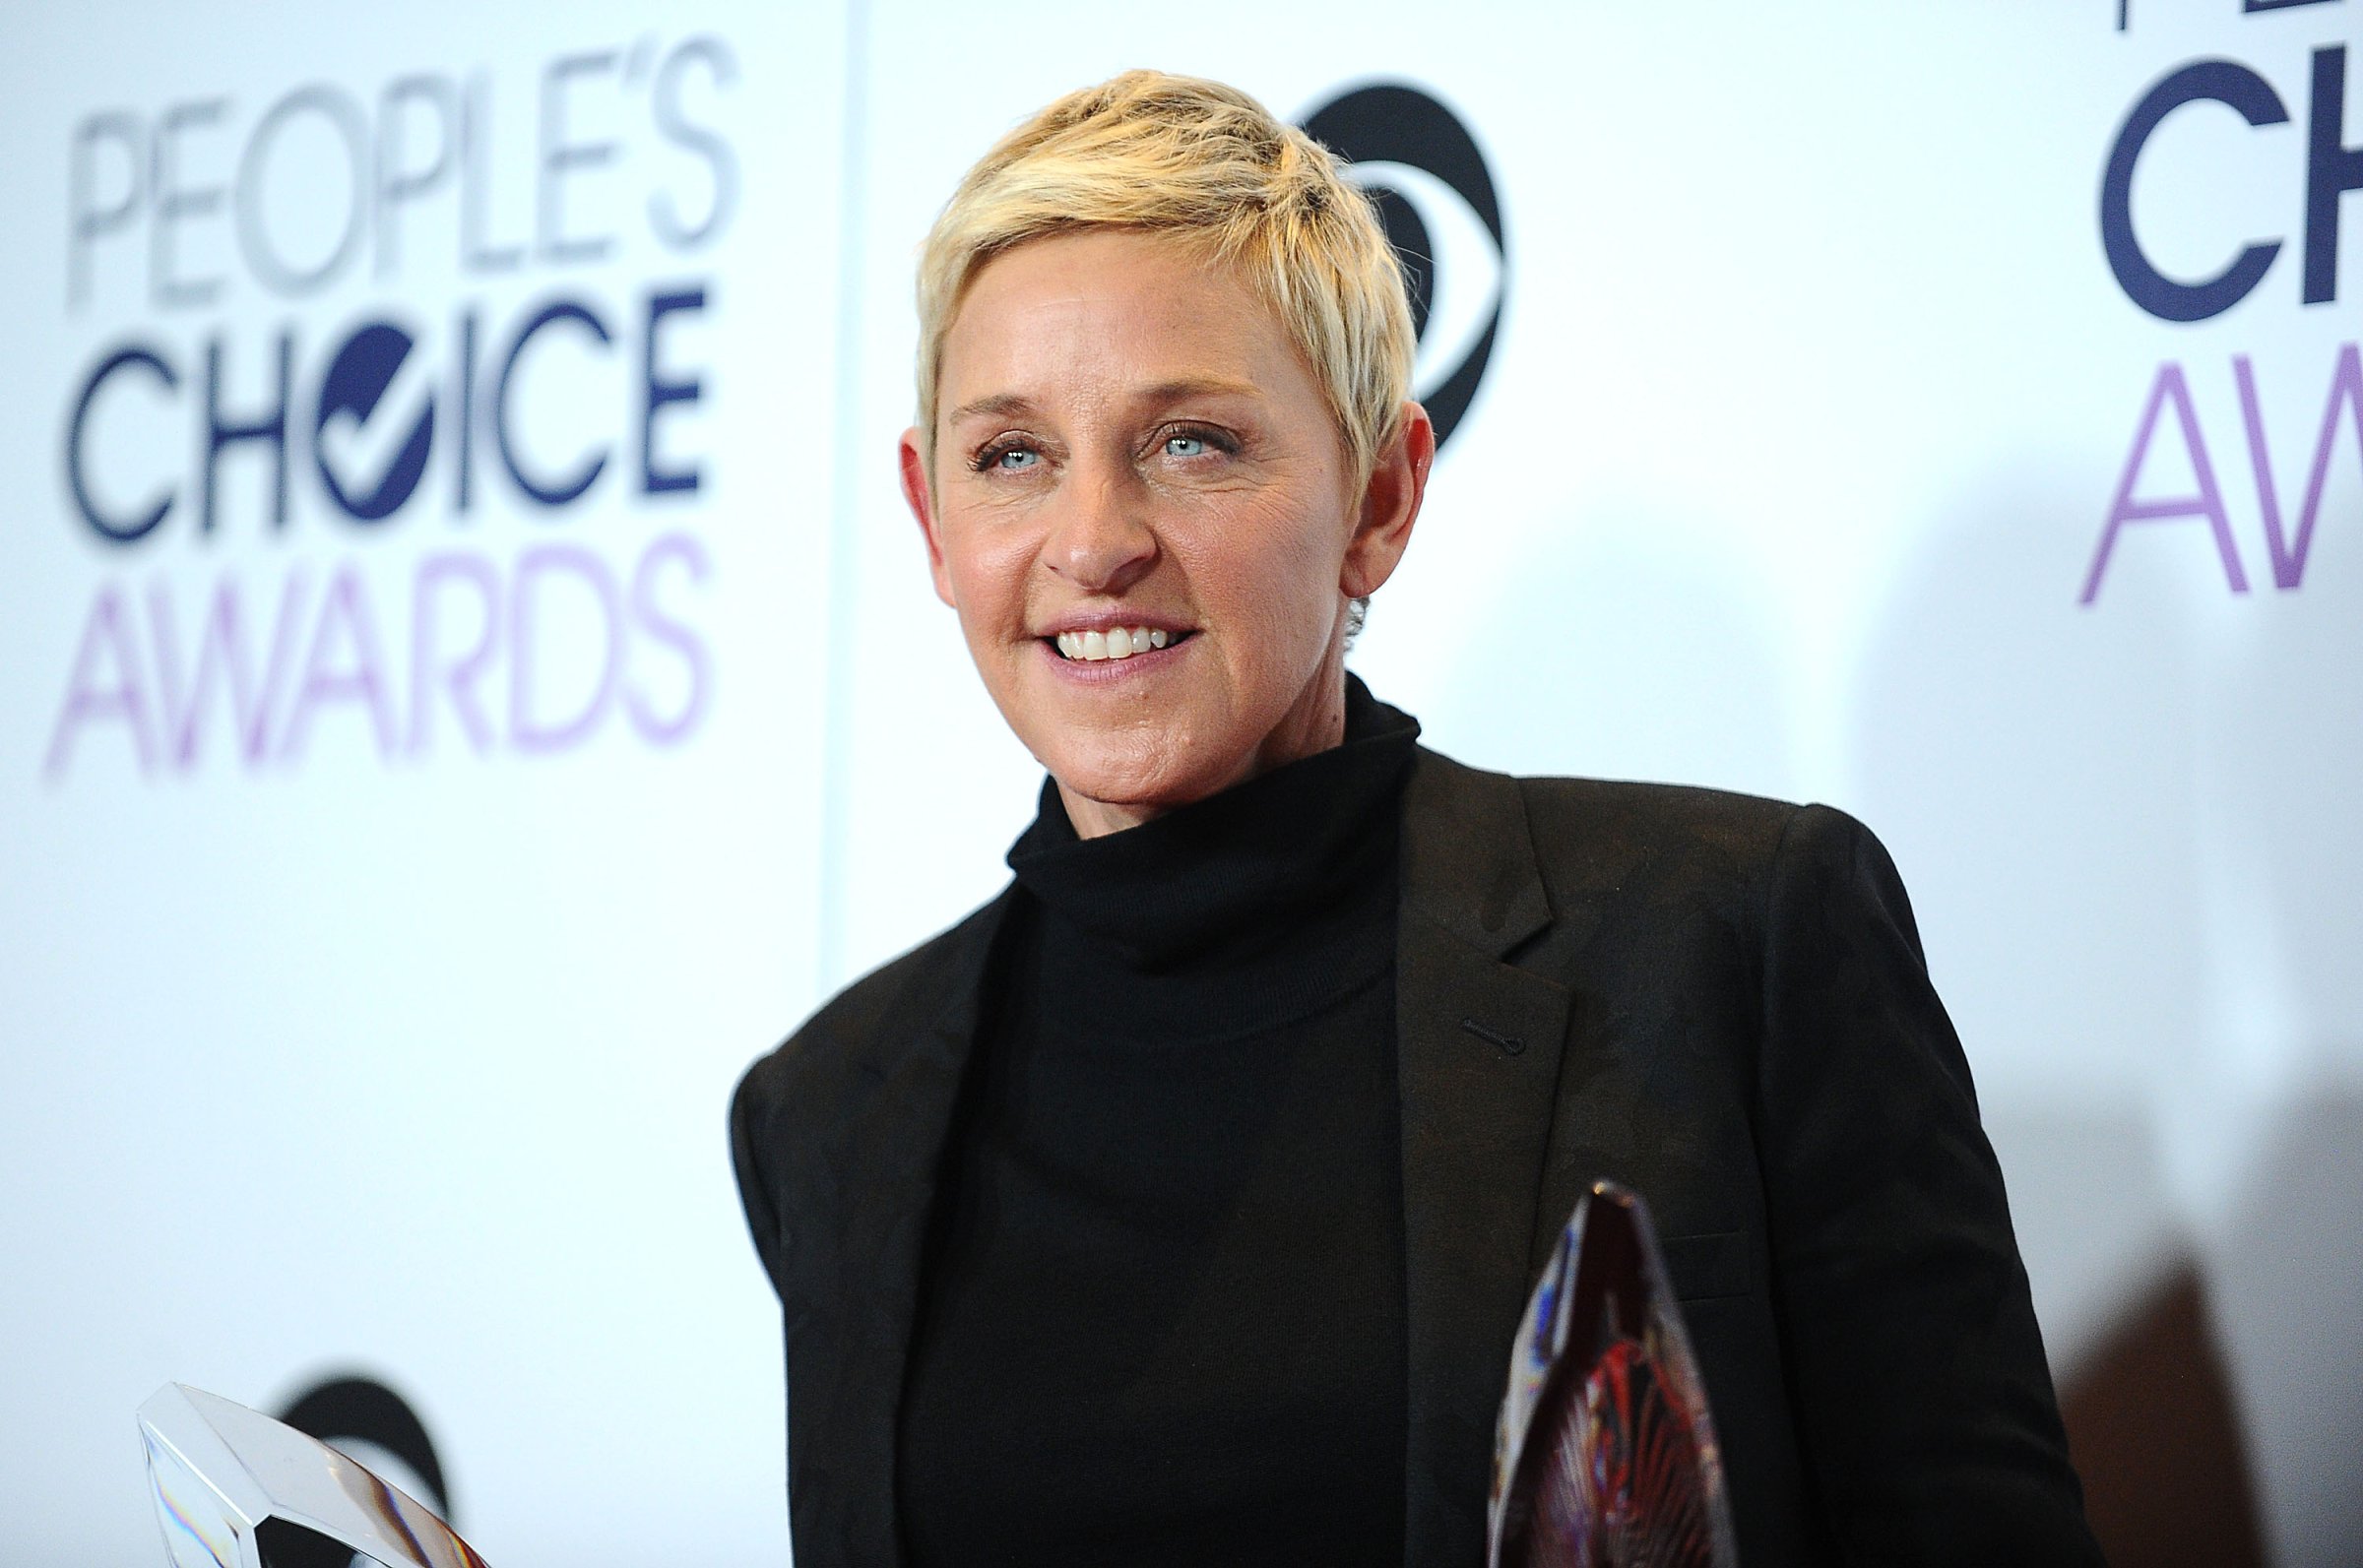 Ellen DeGeneres poses on the press room at the 2016 People's Choice Awards at Microsoft Theater on January 6, 2016 in Los Angeles, California.